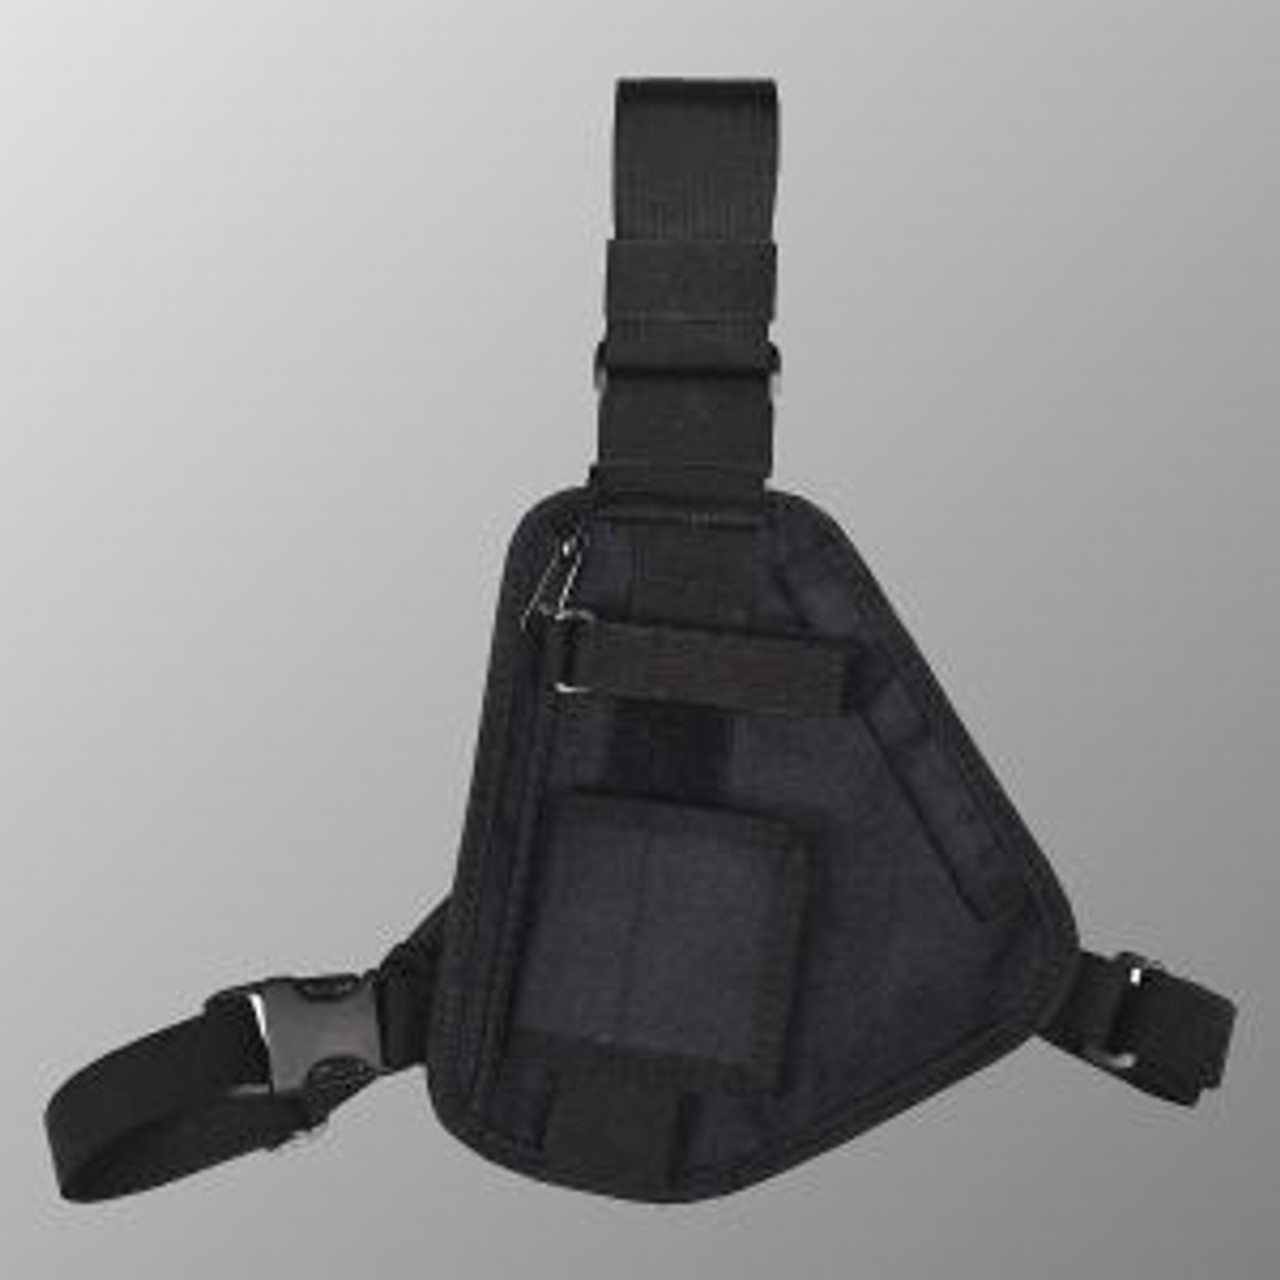 Motorola XPR7550 3-Point Chest Harness - Black